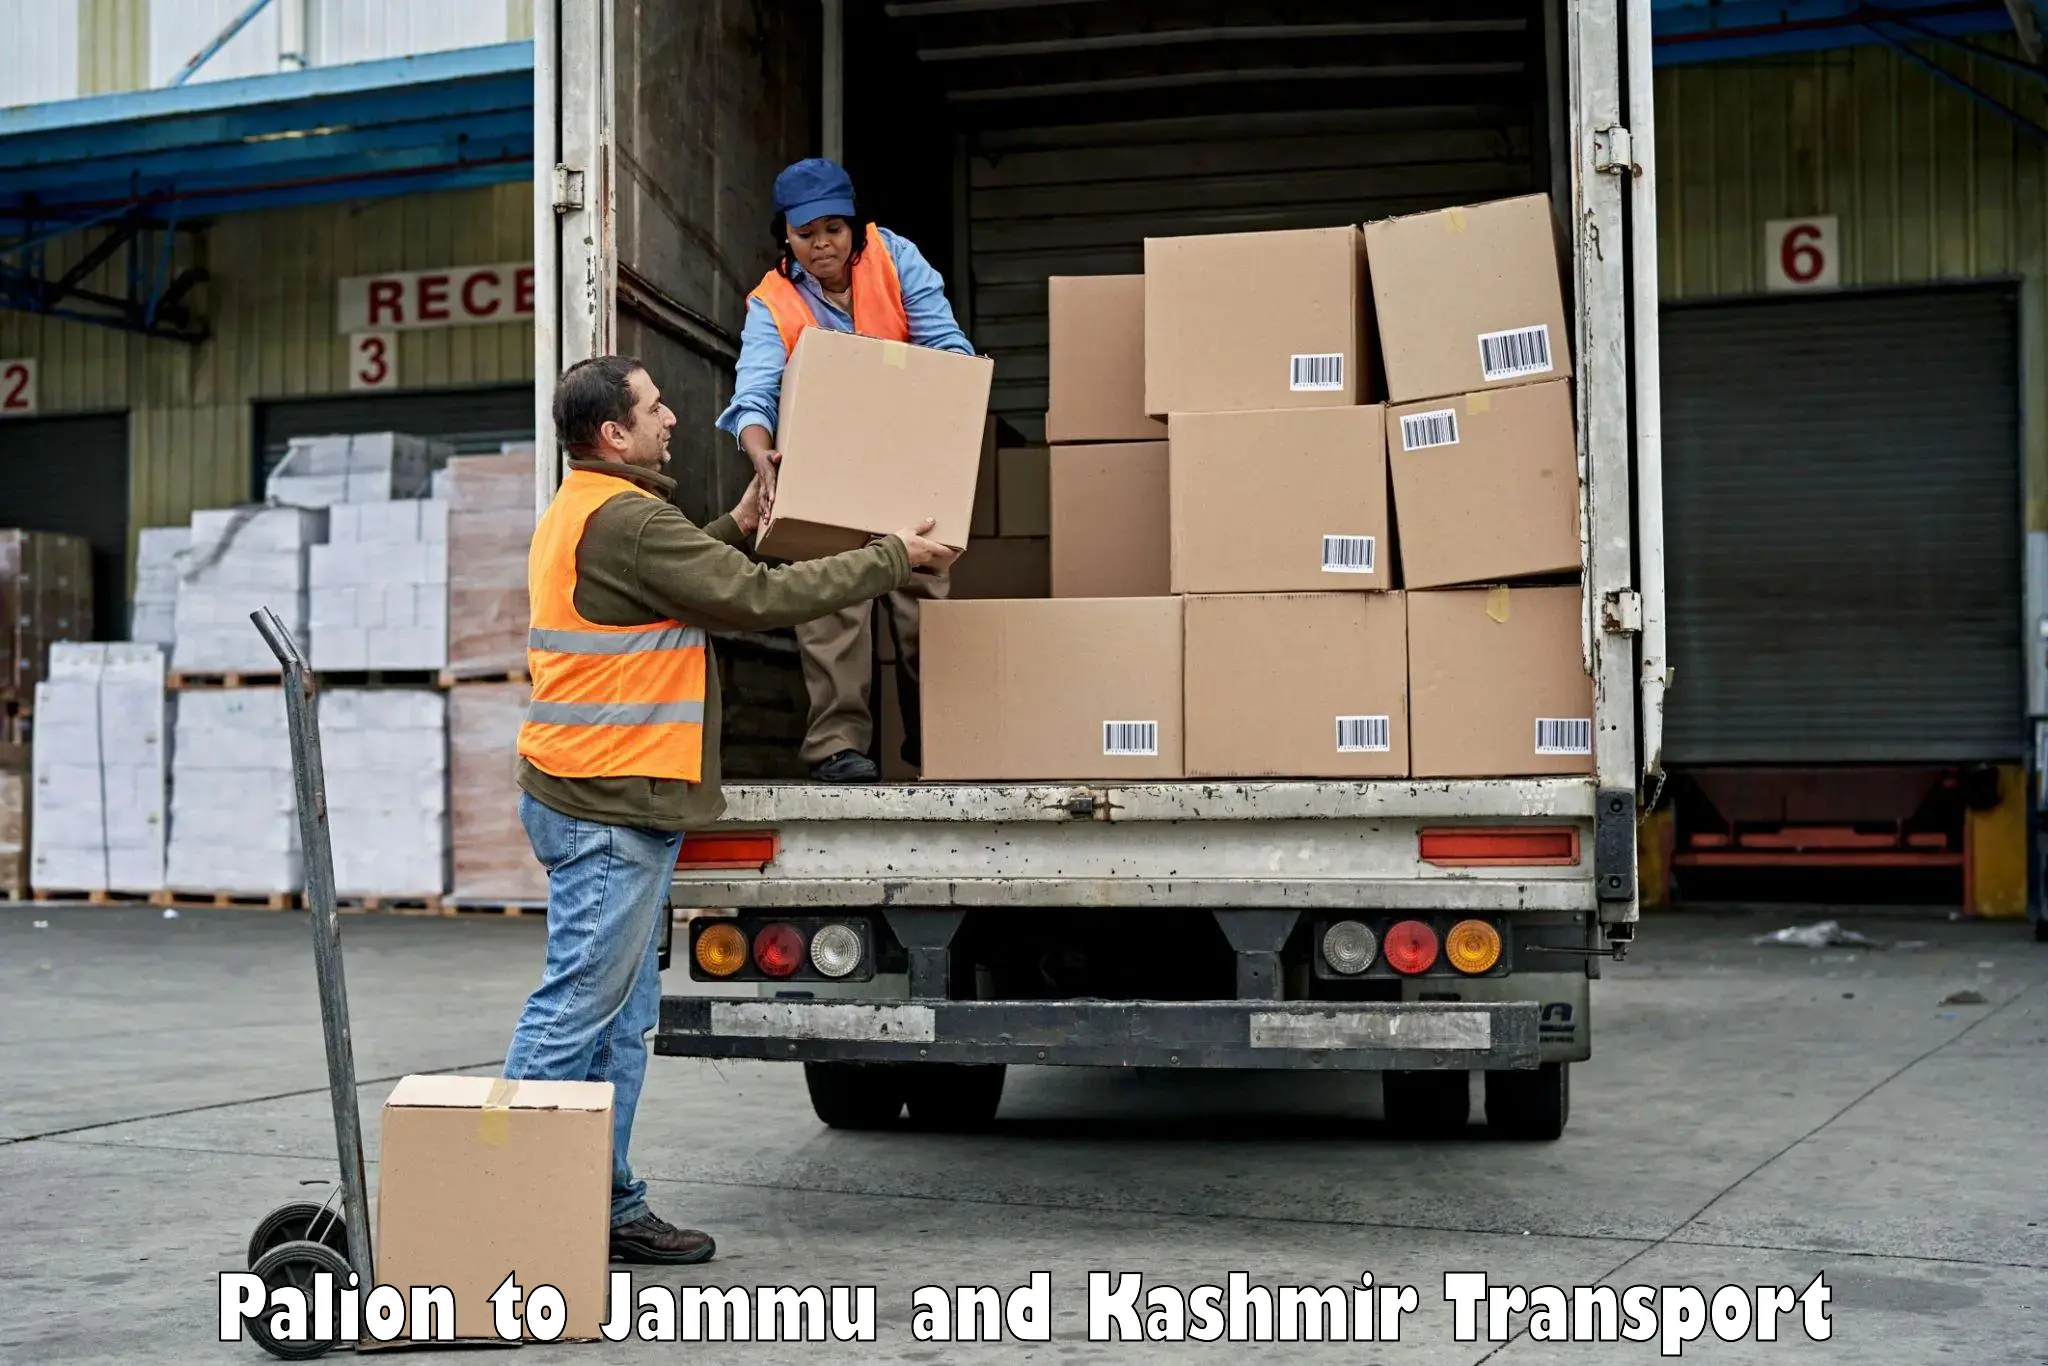 Cargo train transport services Palion to Jammu and Kashmir